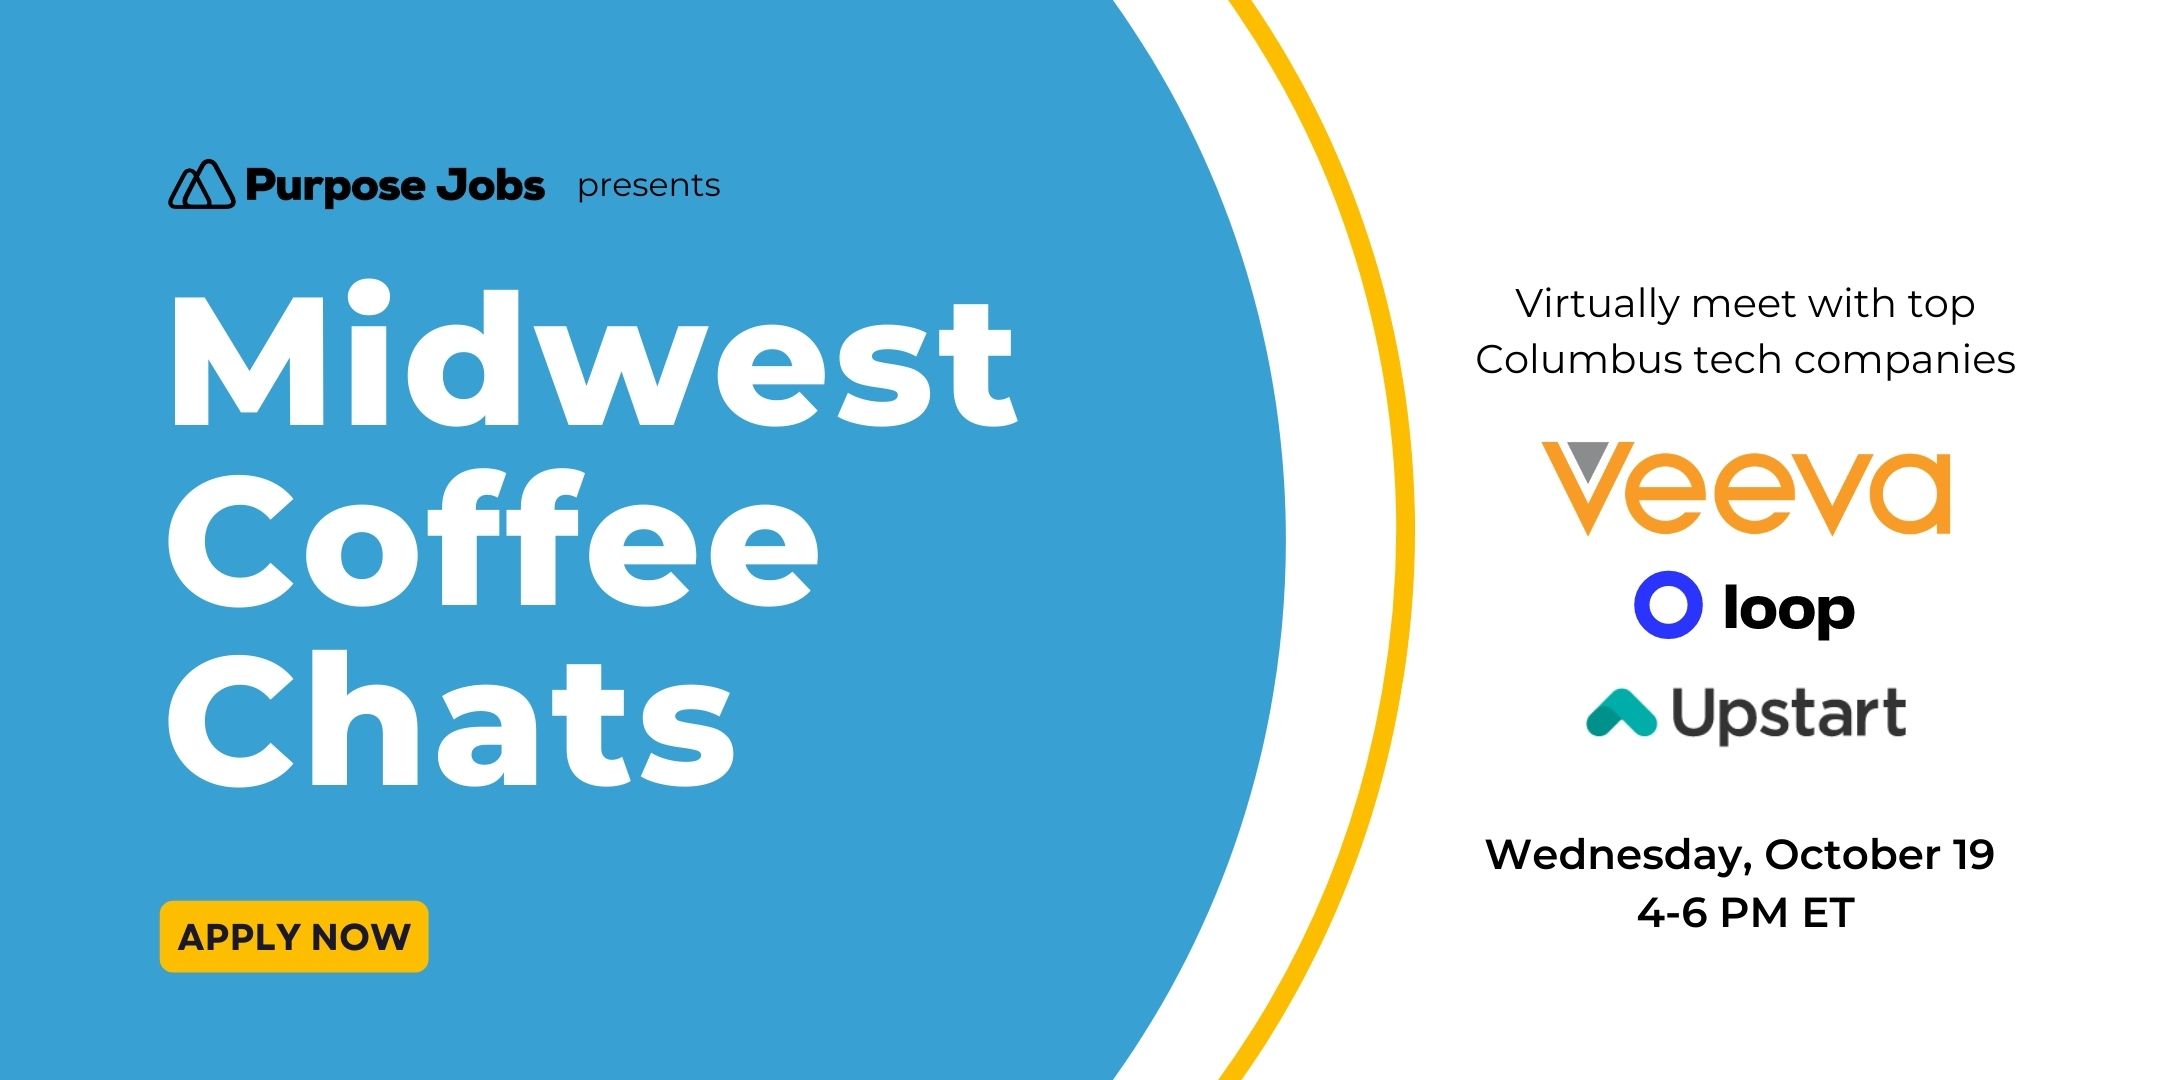 Midwest Coffee Chats Events Page Image (1)